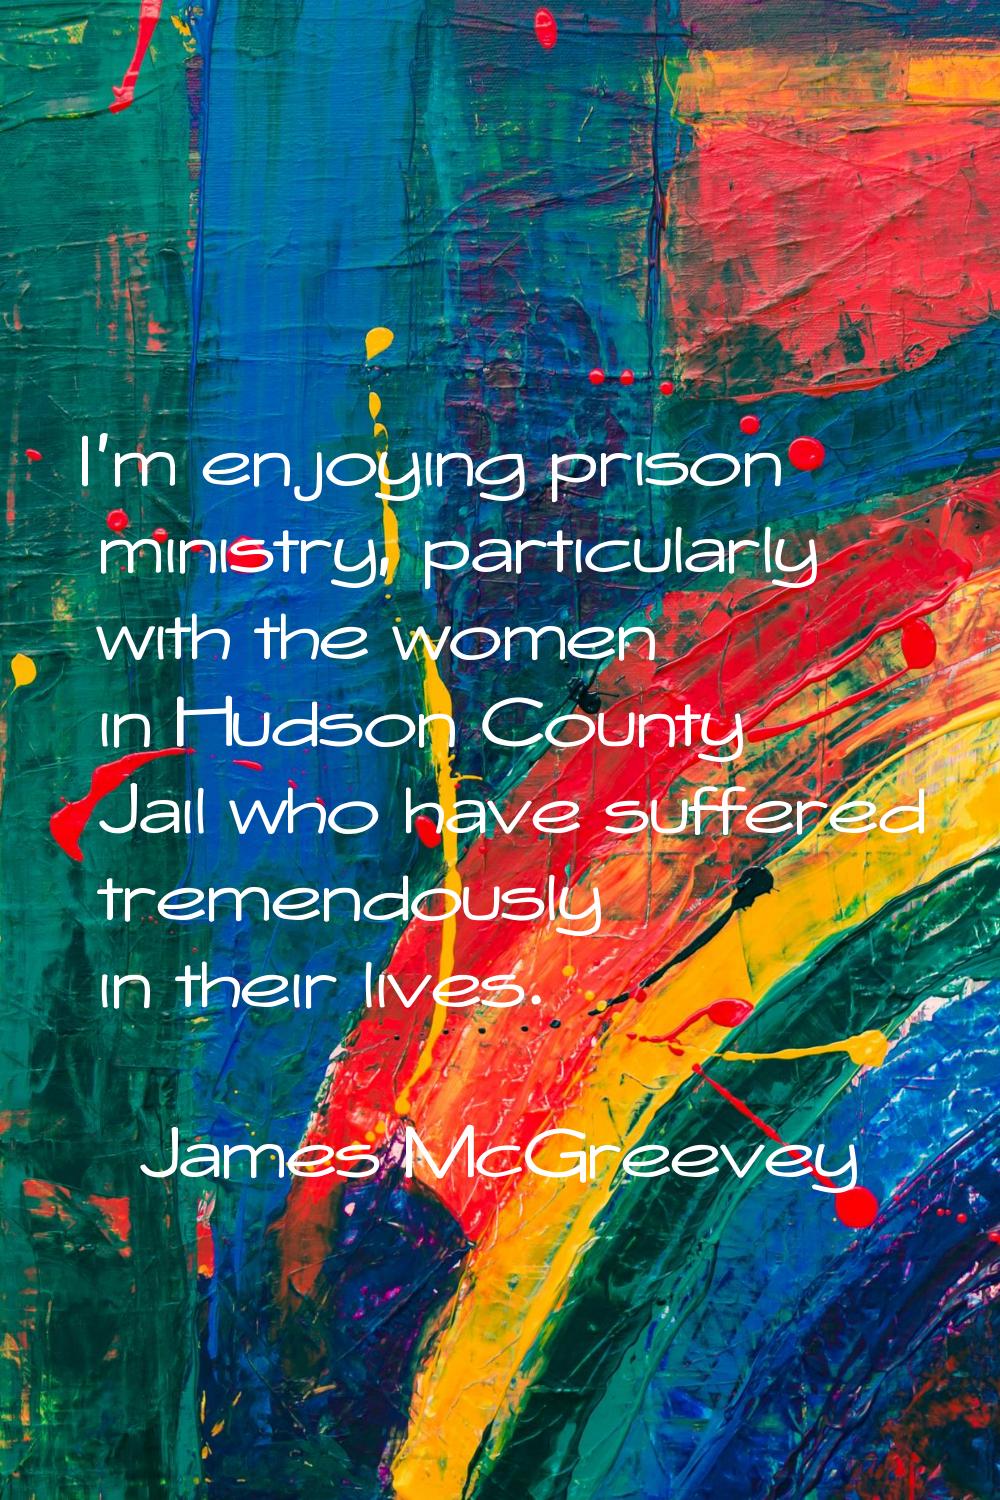 I'm enjoying prison ministry, particularly with the women in Hudson County Jail who have suffered t